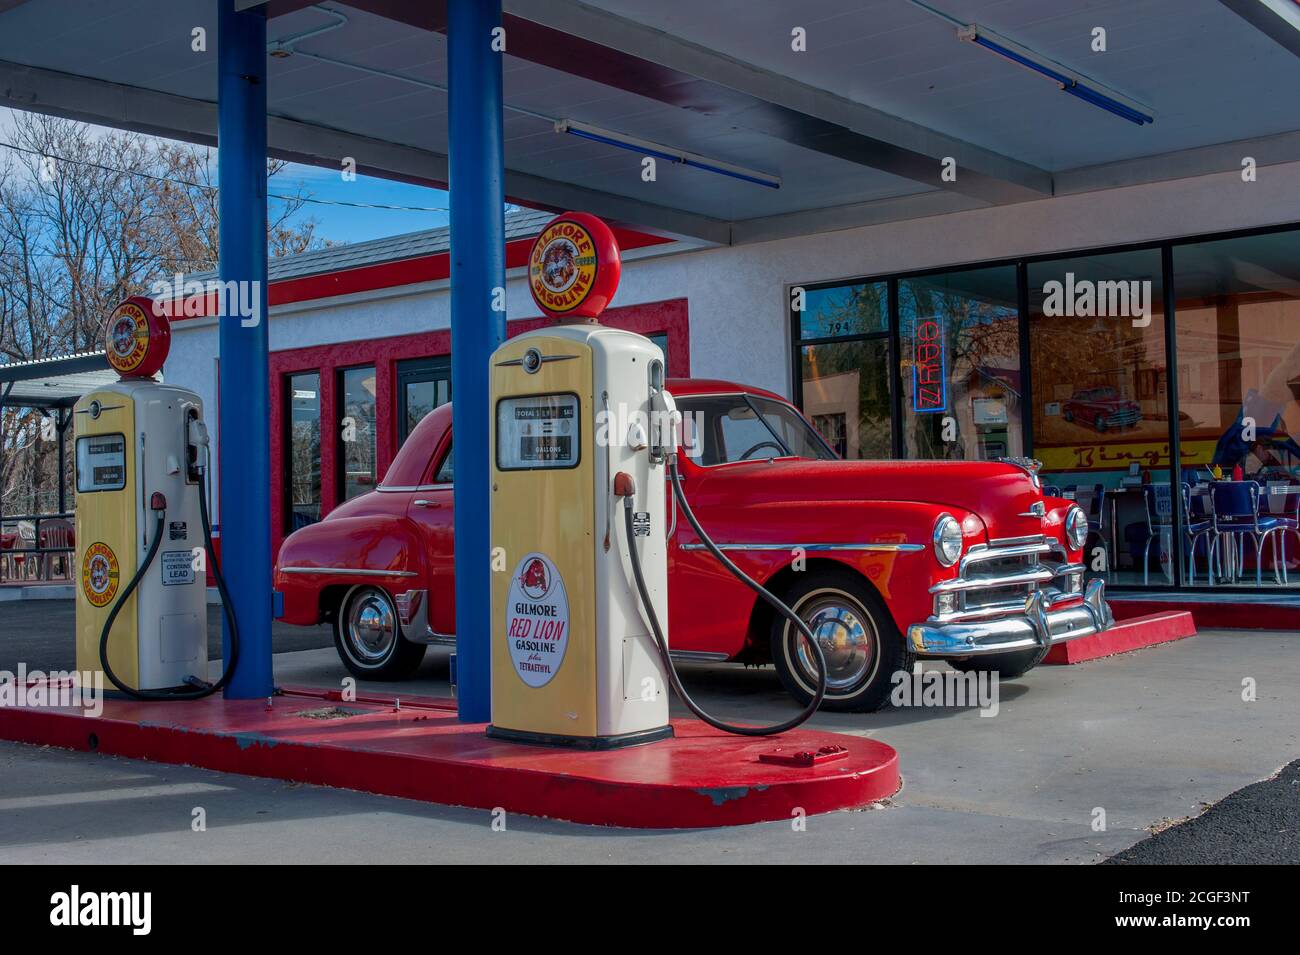 A 1950 Plymouth Deluxe car at an old gas station, now a Bings Burger Restaurant, in the old part of town of in Cottonwood, a historic city in the Verd Stock Photo